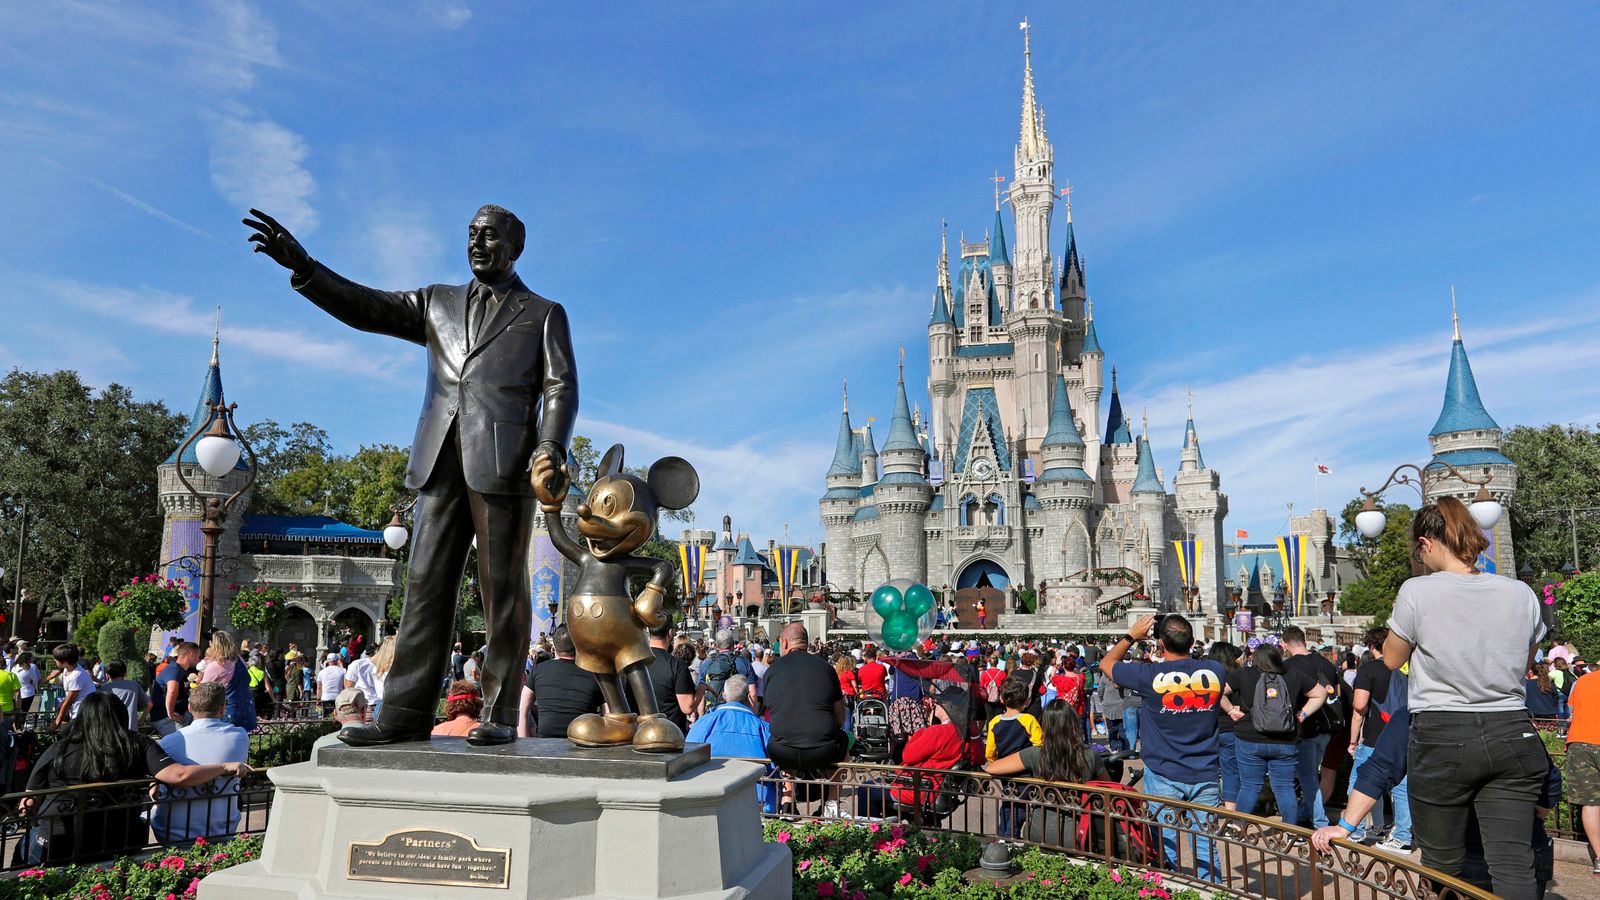 Florida state governor Ron DeSantis takes control of Walt Disney World's self-governing district in apparent retaliation for 'Don't Say Gay' bill criticism